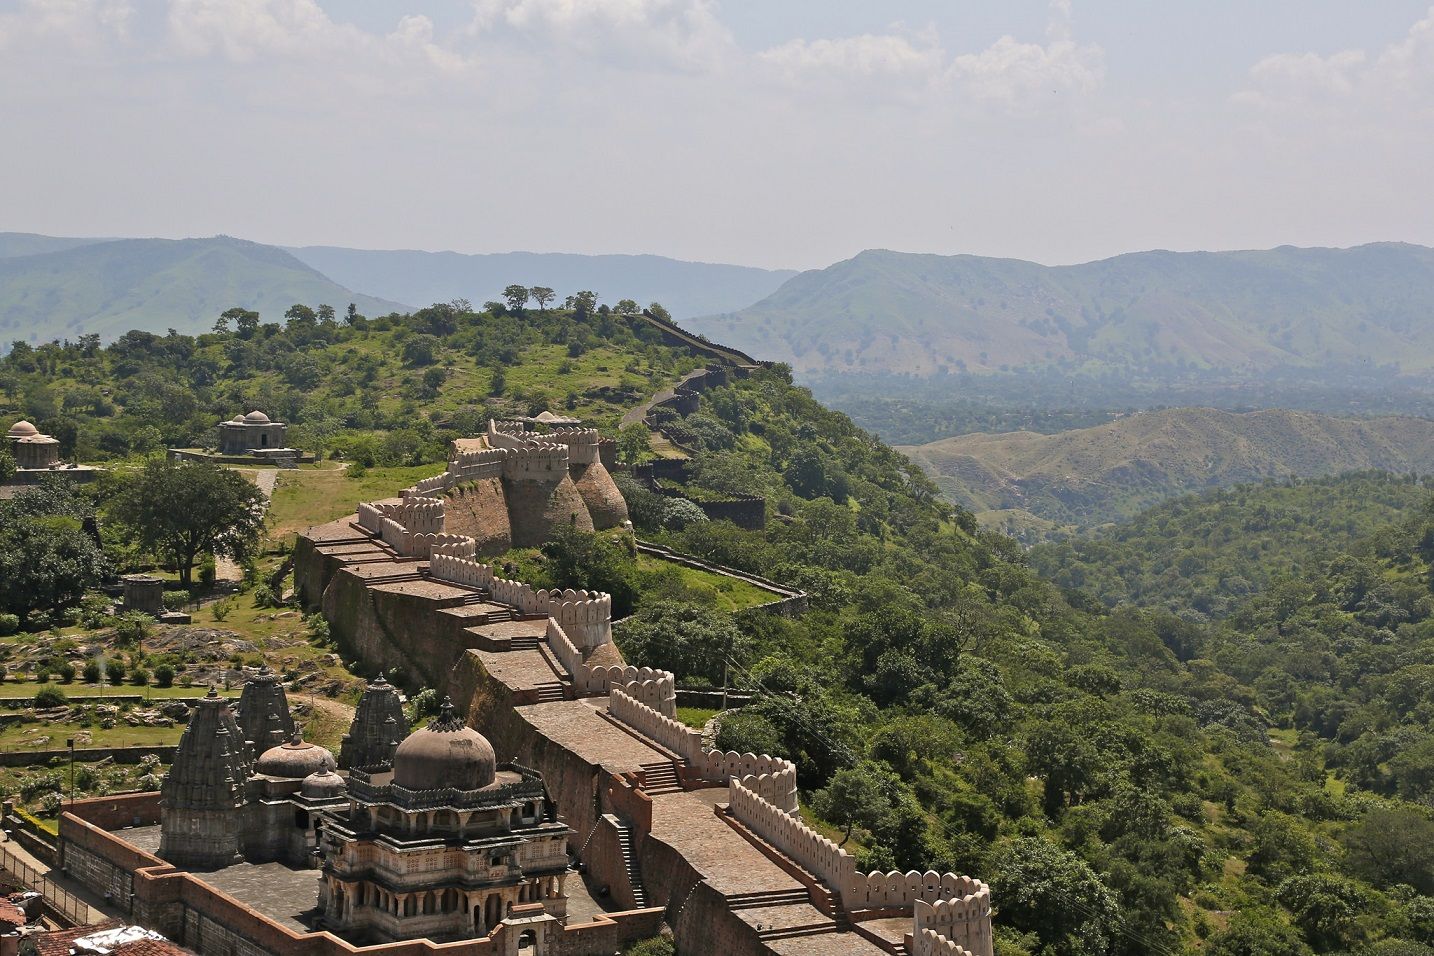 Kumbhalgarh - Second Largest wall in the world